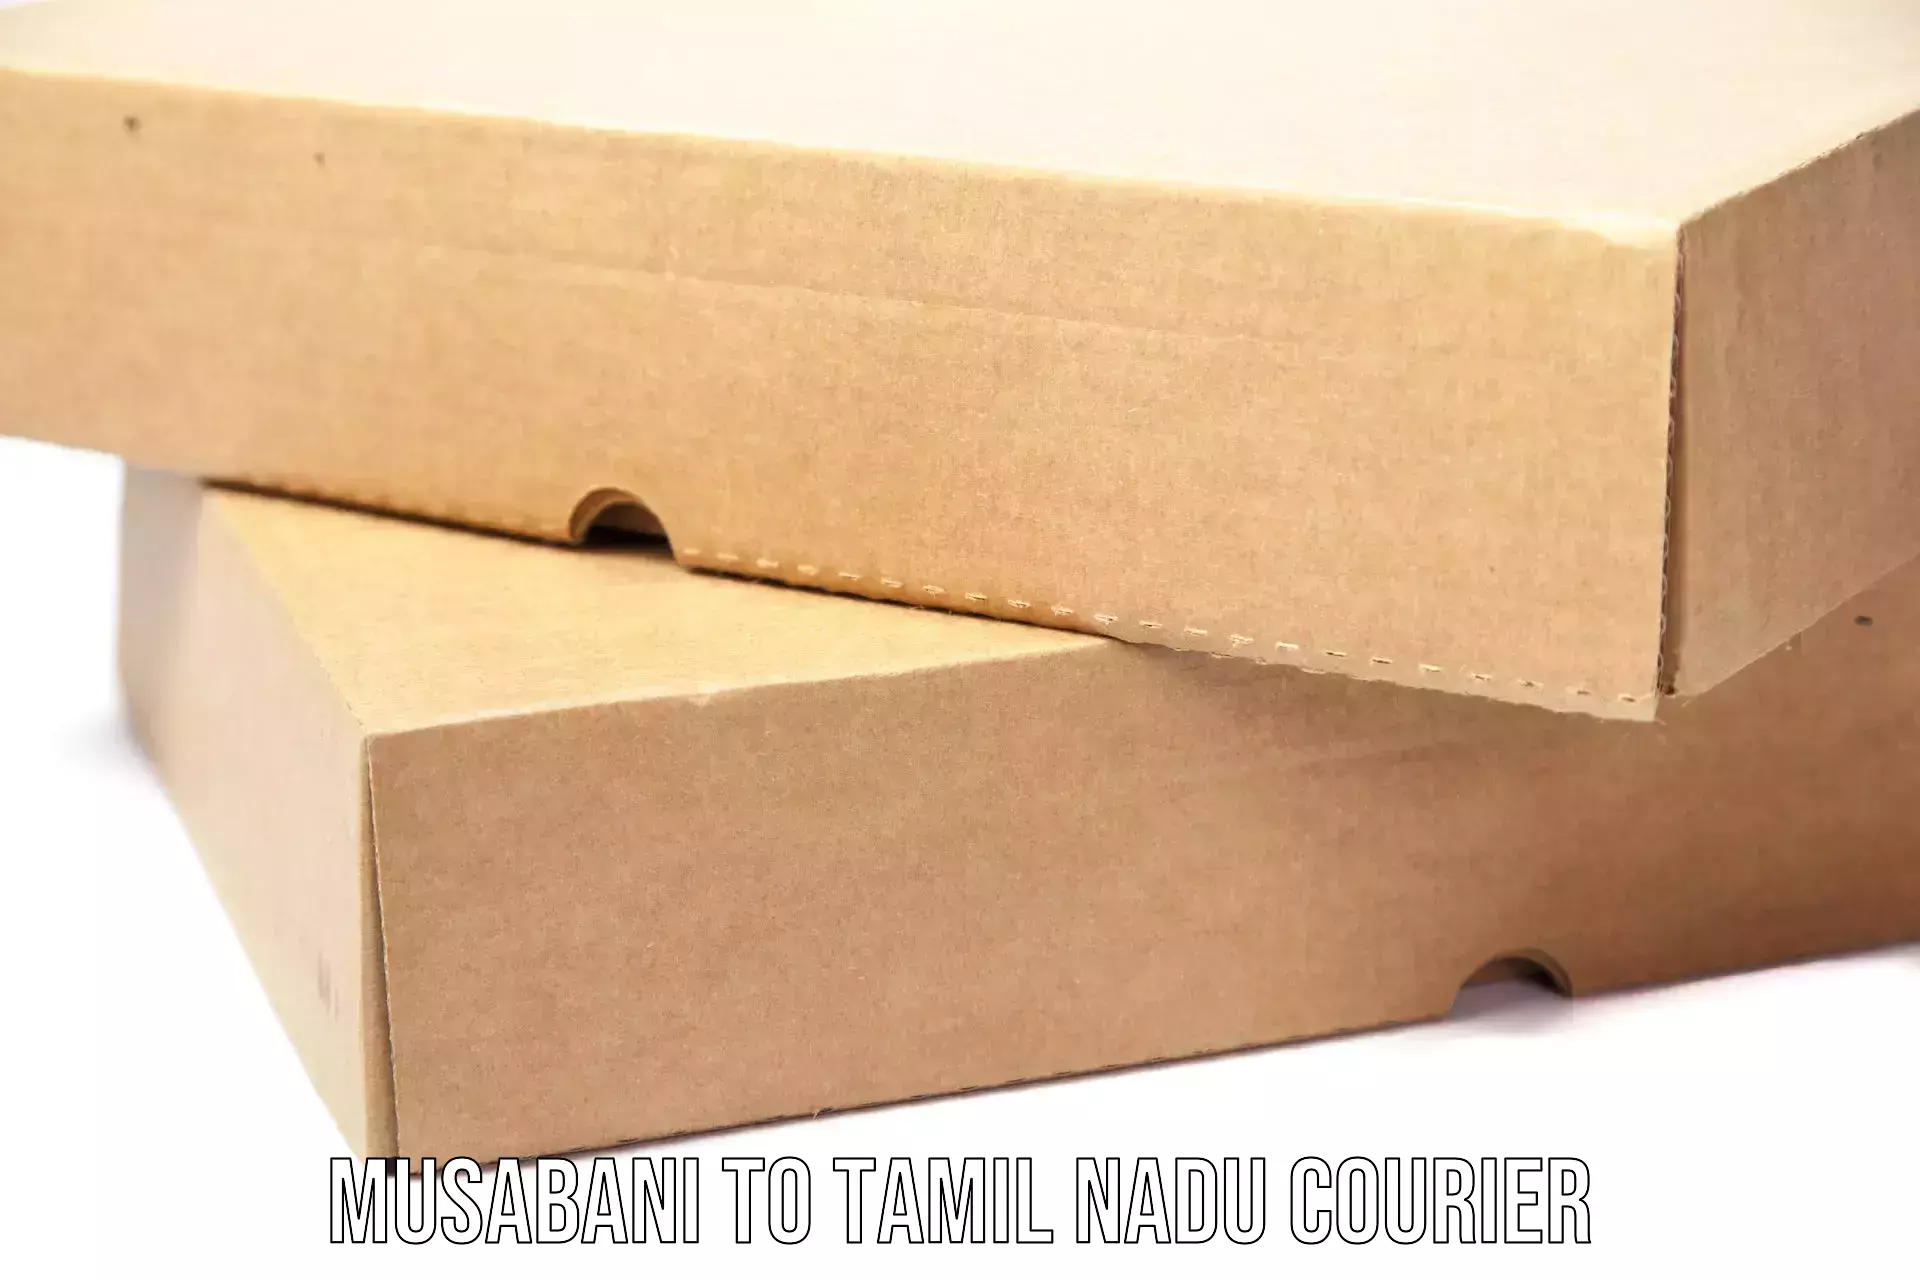 Sustainable courier practices Musabani to Vellore Institute of Technology